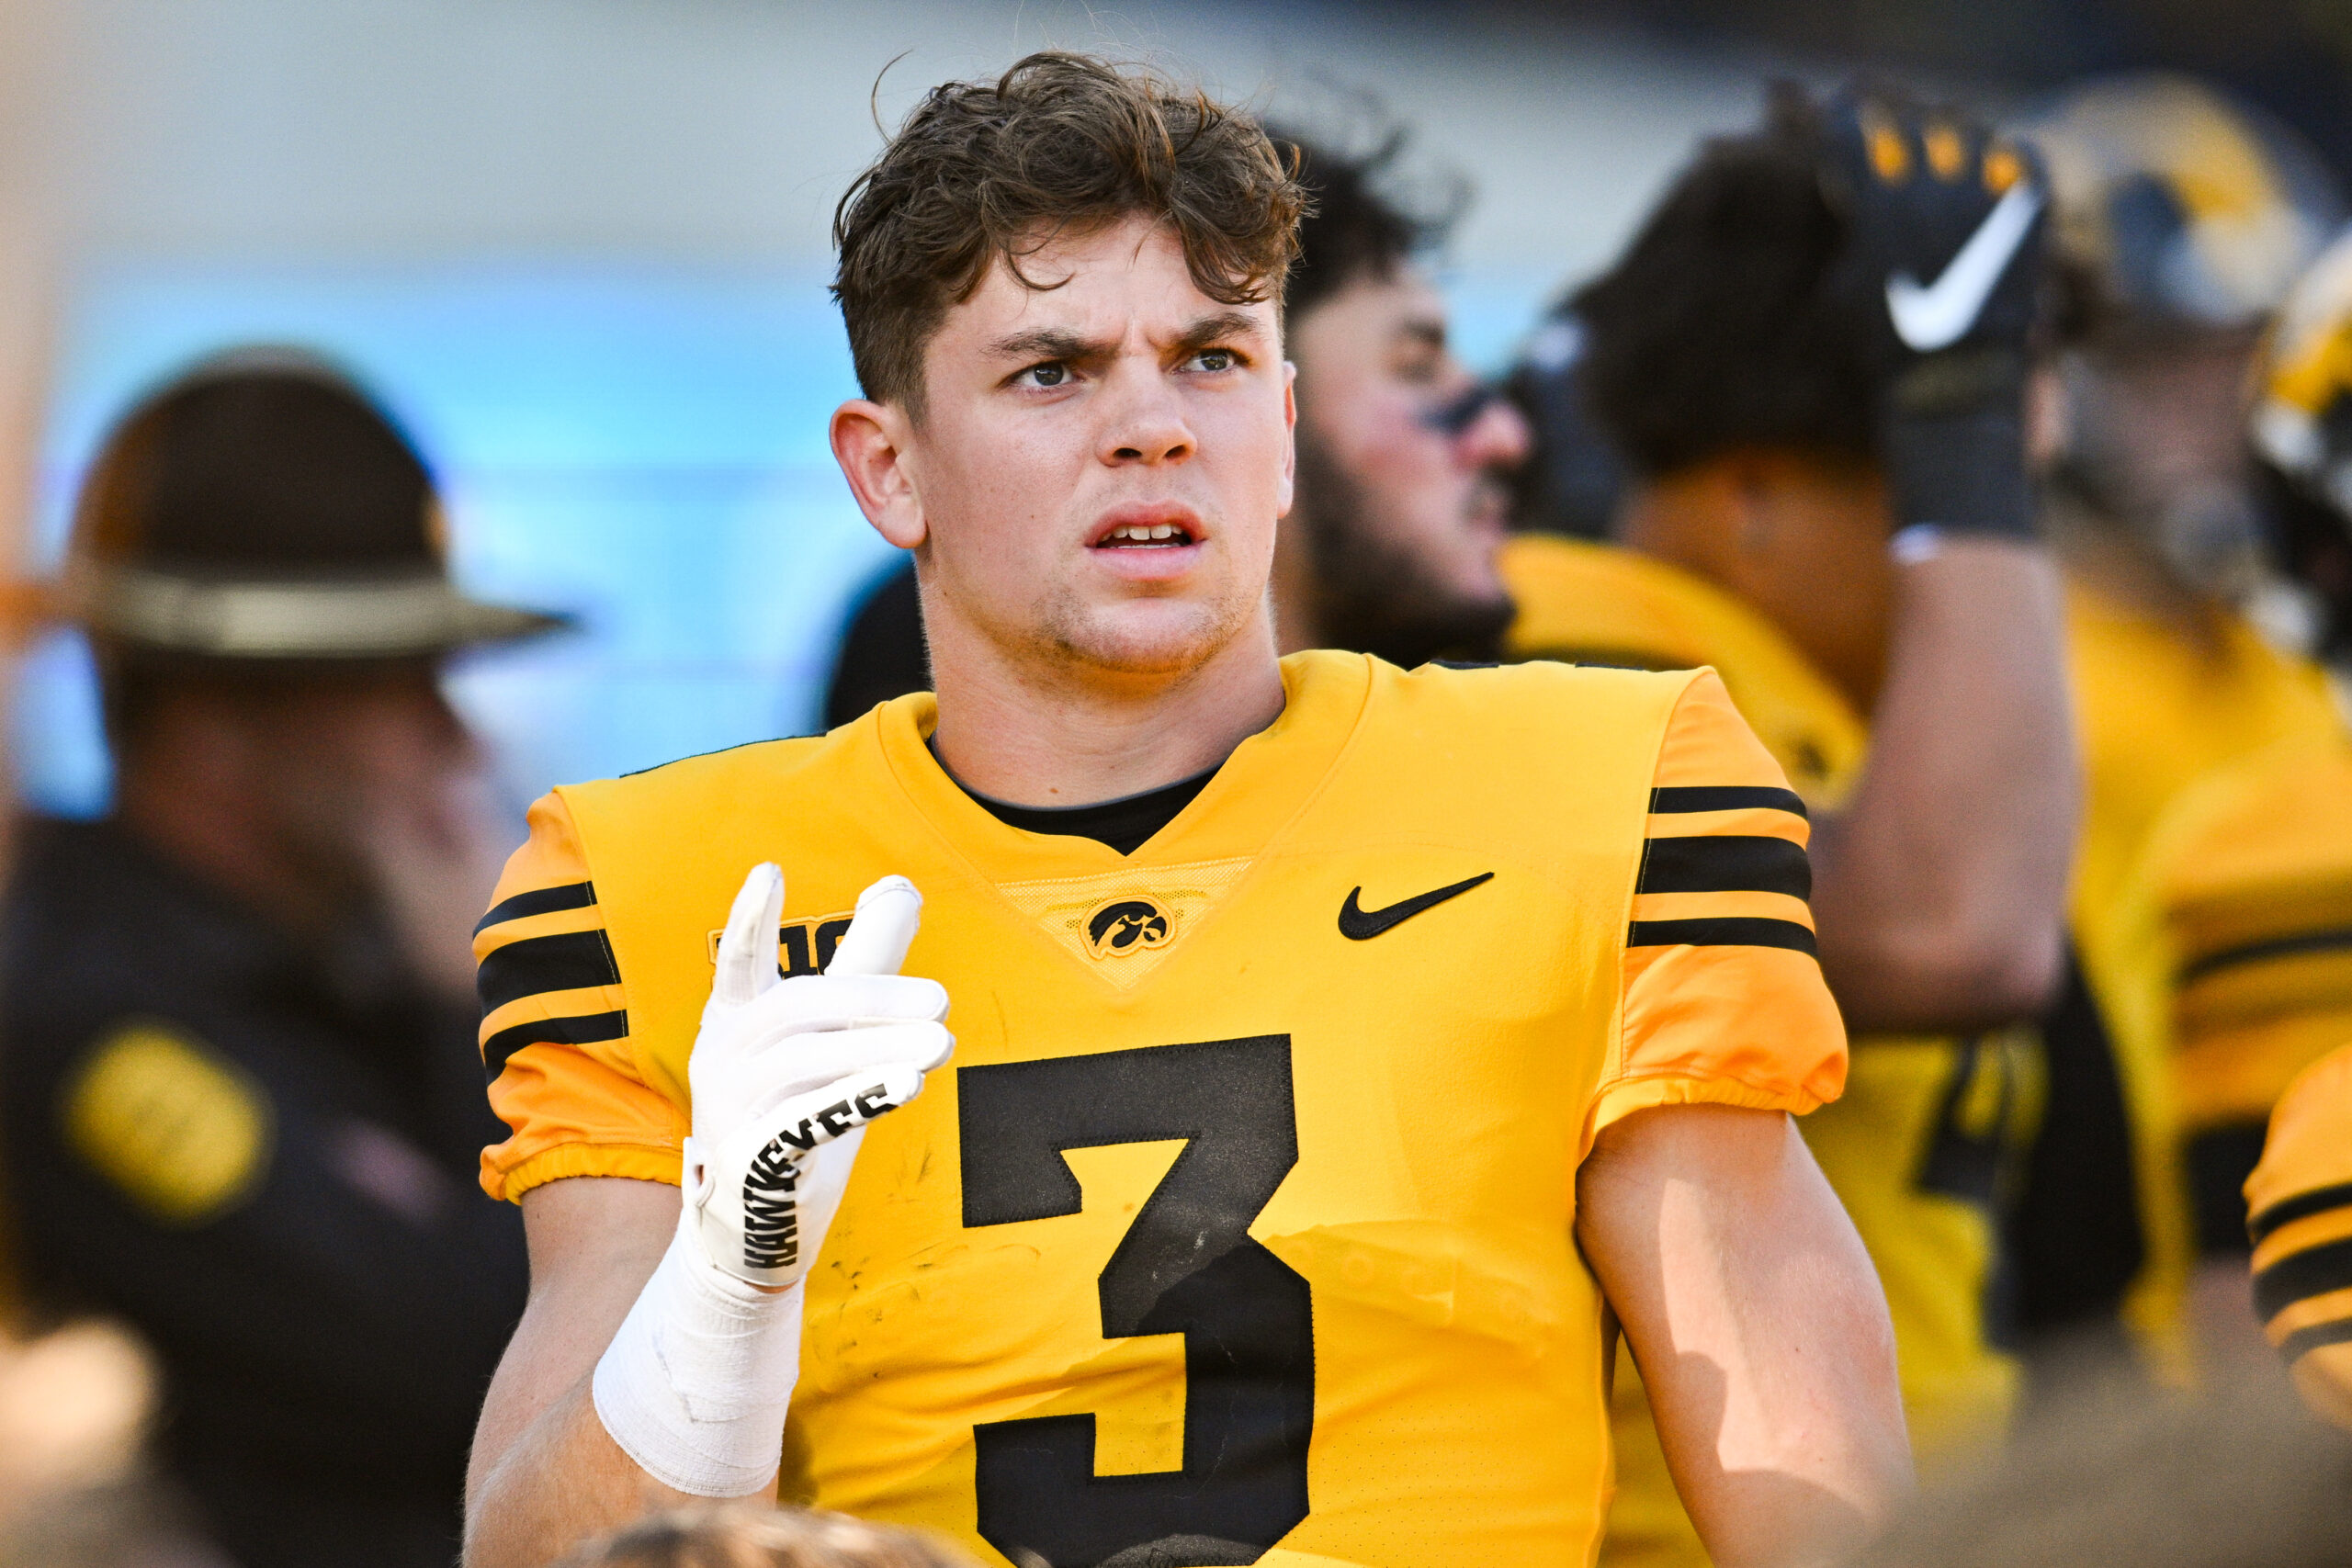 Iowa Hawkeyes defensive back Cooper DeJean (3) reacts during the second quarter against the Minnesota Golden Gophers at Kinnick Stadium.